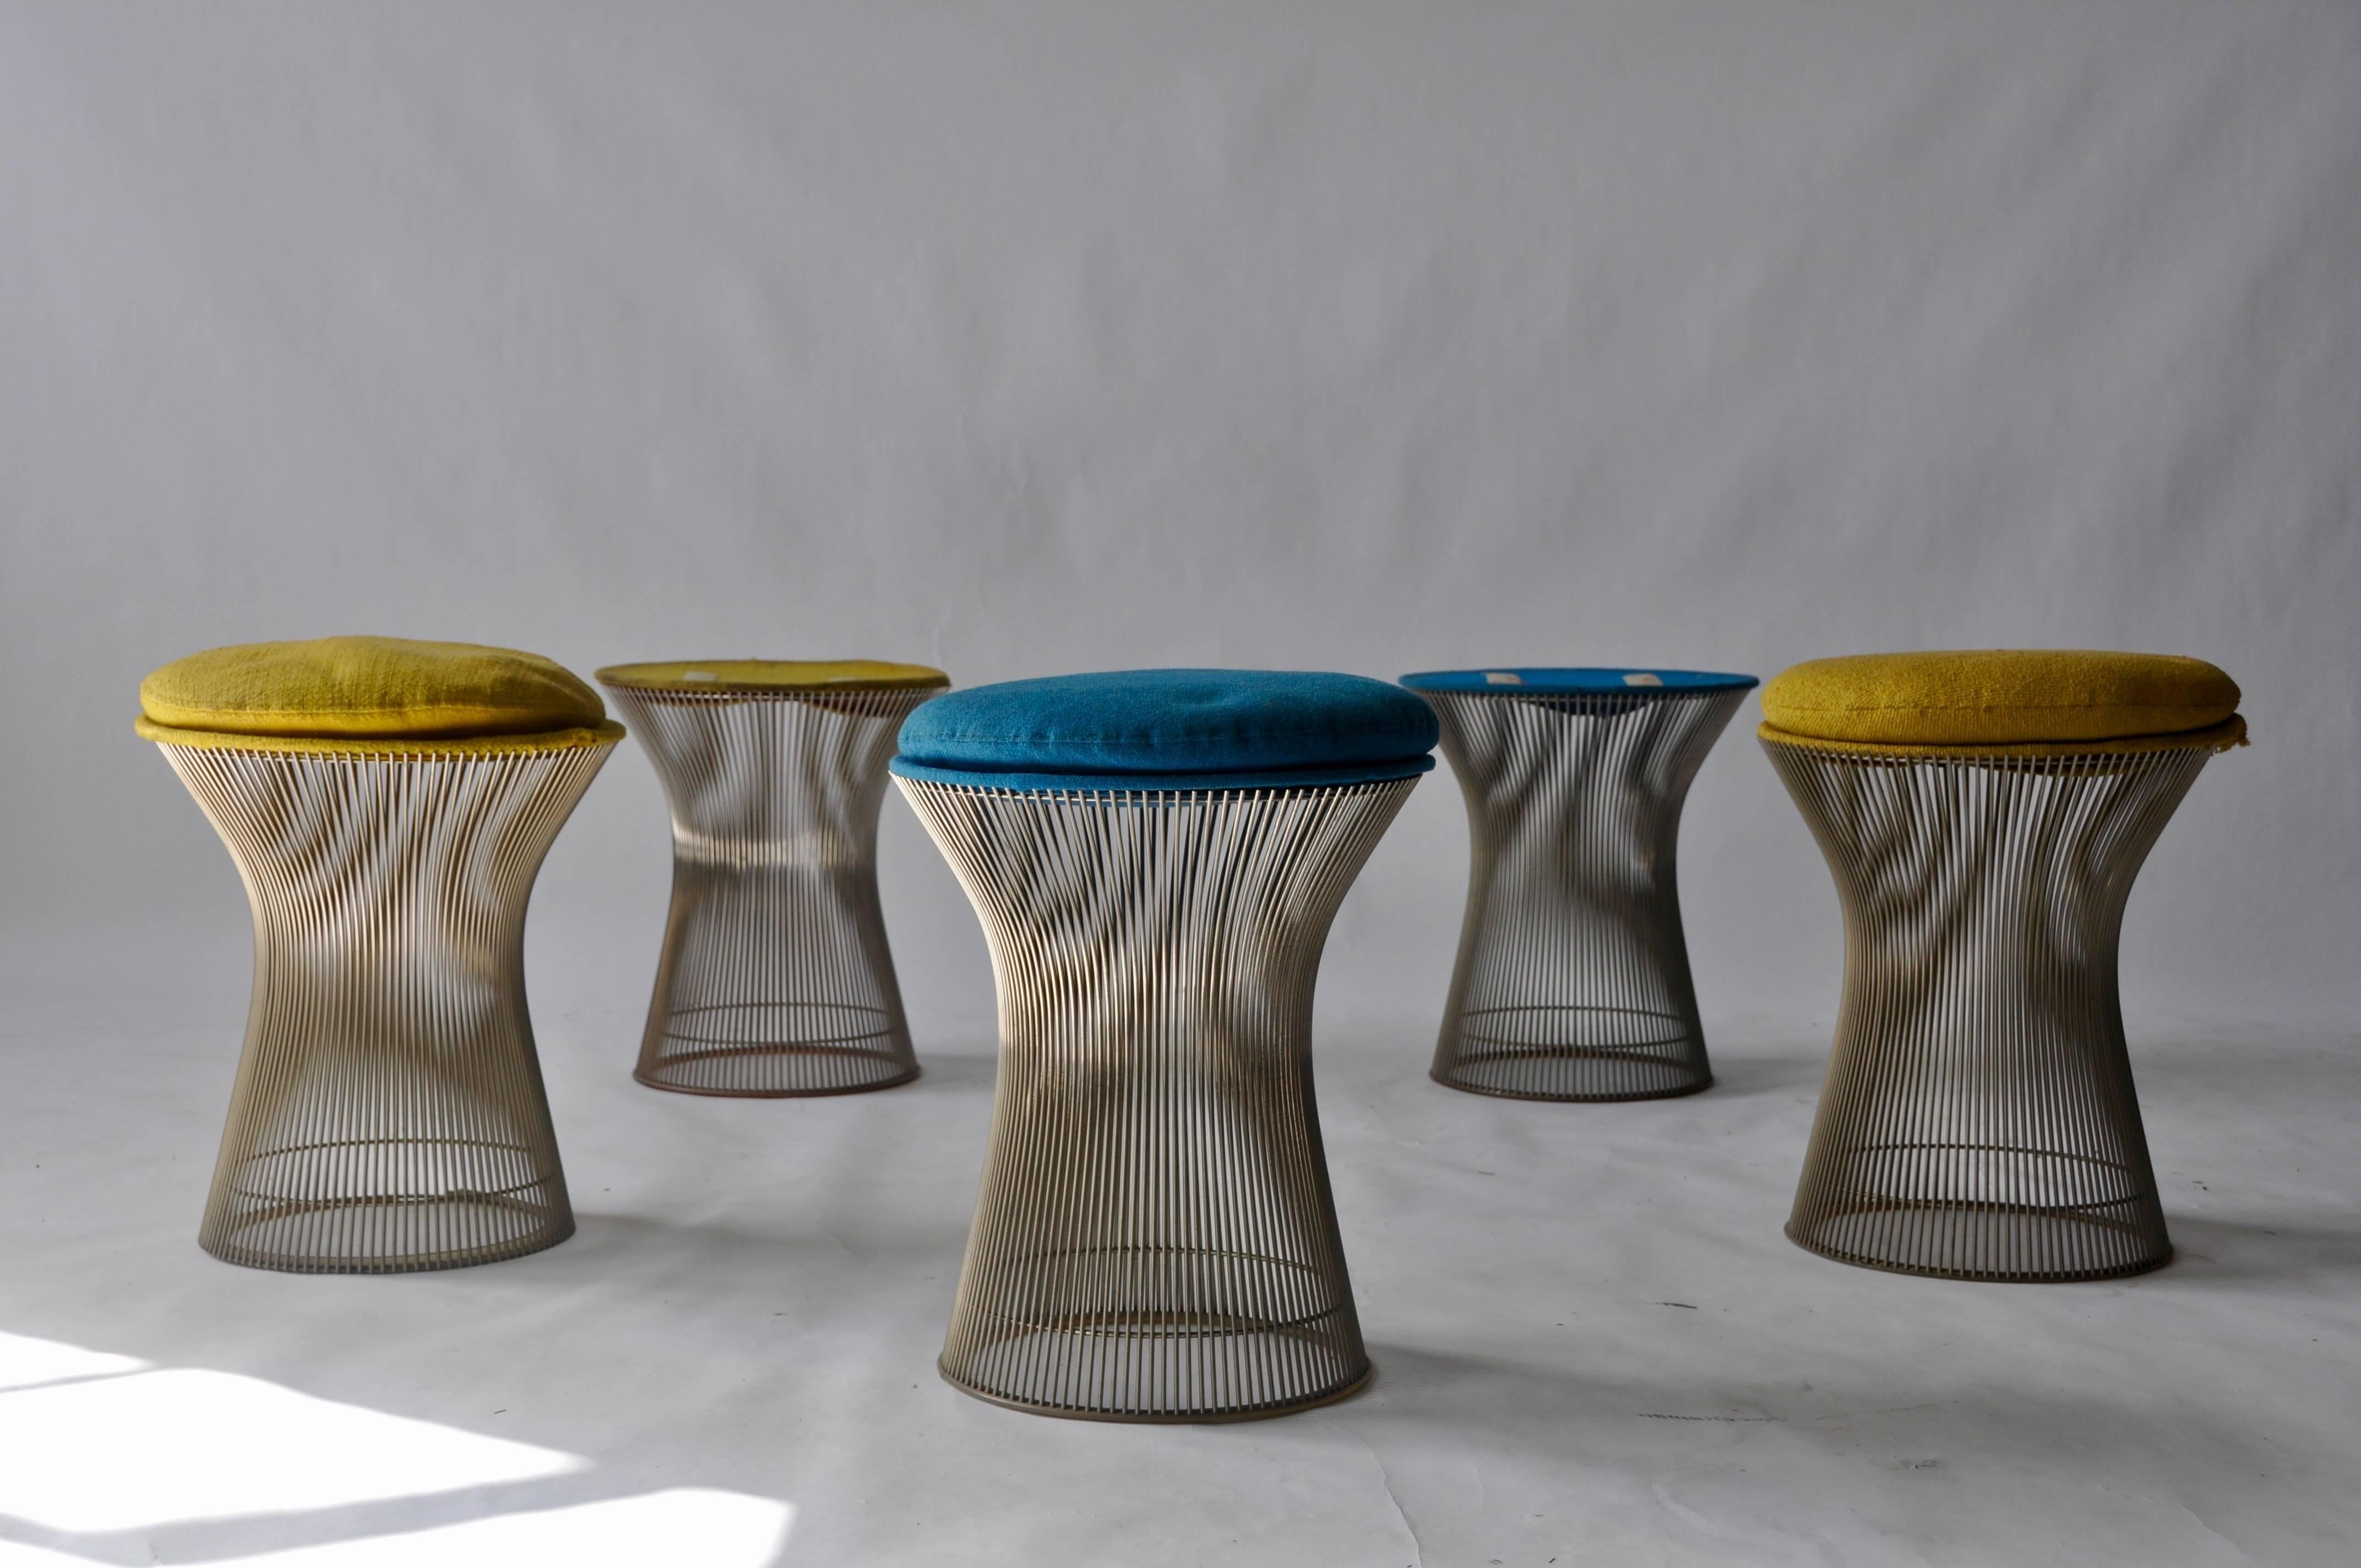 Set of five Warren Platner stools for Knoll. Originally purchased for the Avon showroom in NYC. 

We will break up the set if all five are not needed.